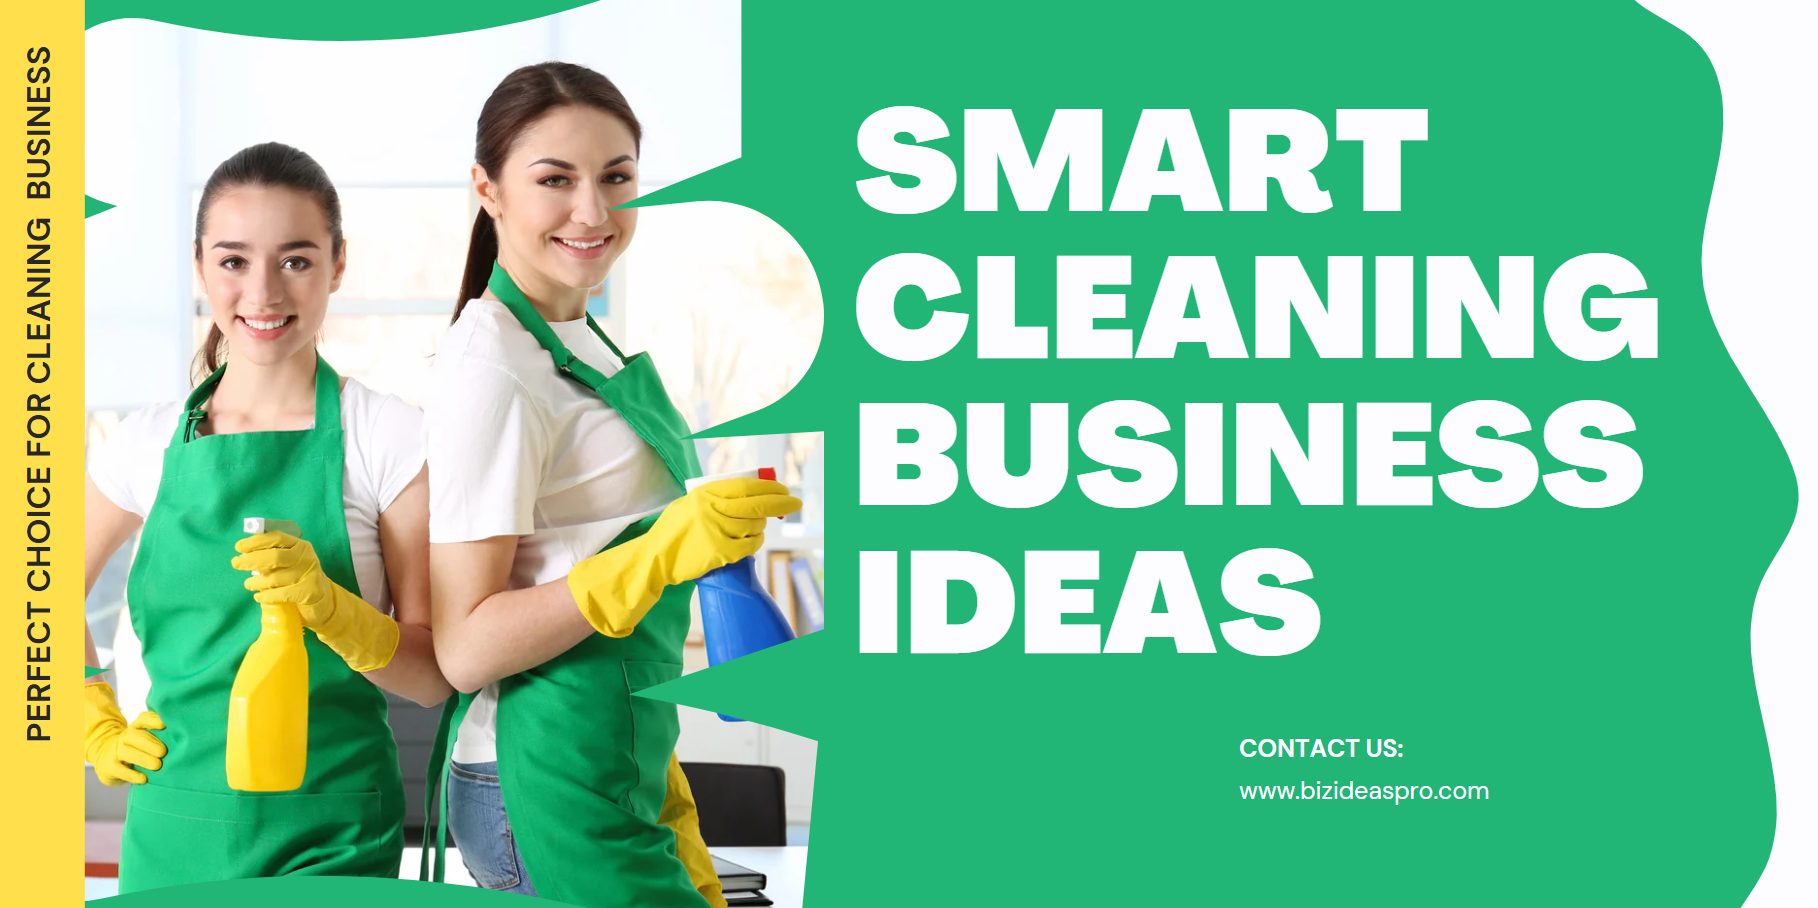 cleaning business ideas by bizideaspro